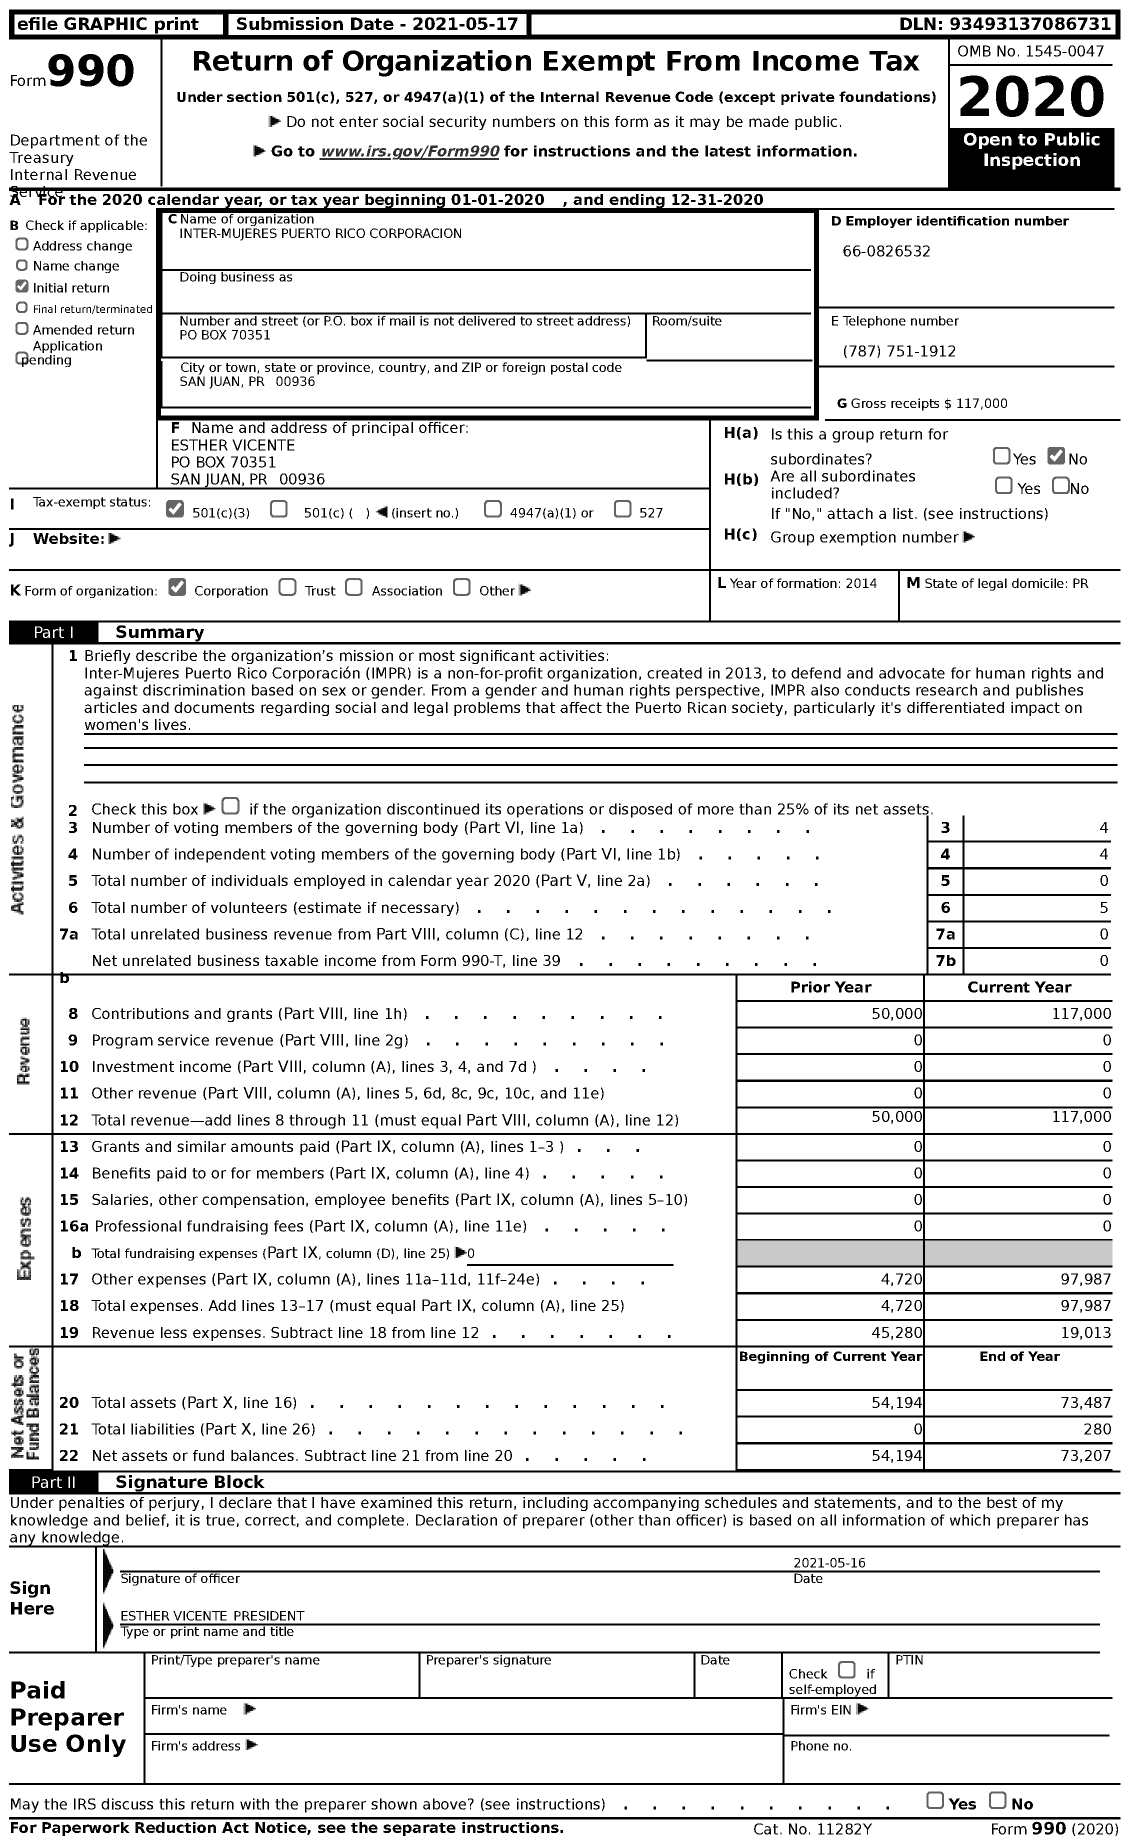 Image of first page of 2020 Form 990 for Inter-Mujeres Puerto Rico Corporacion